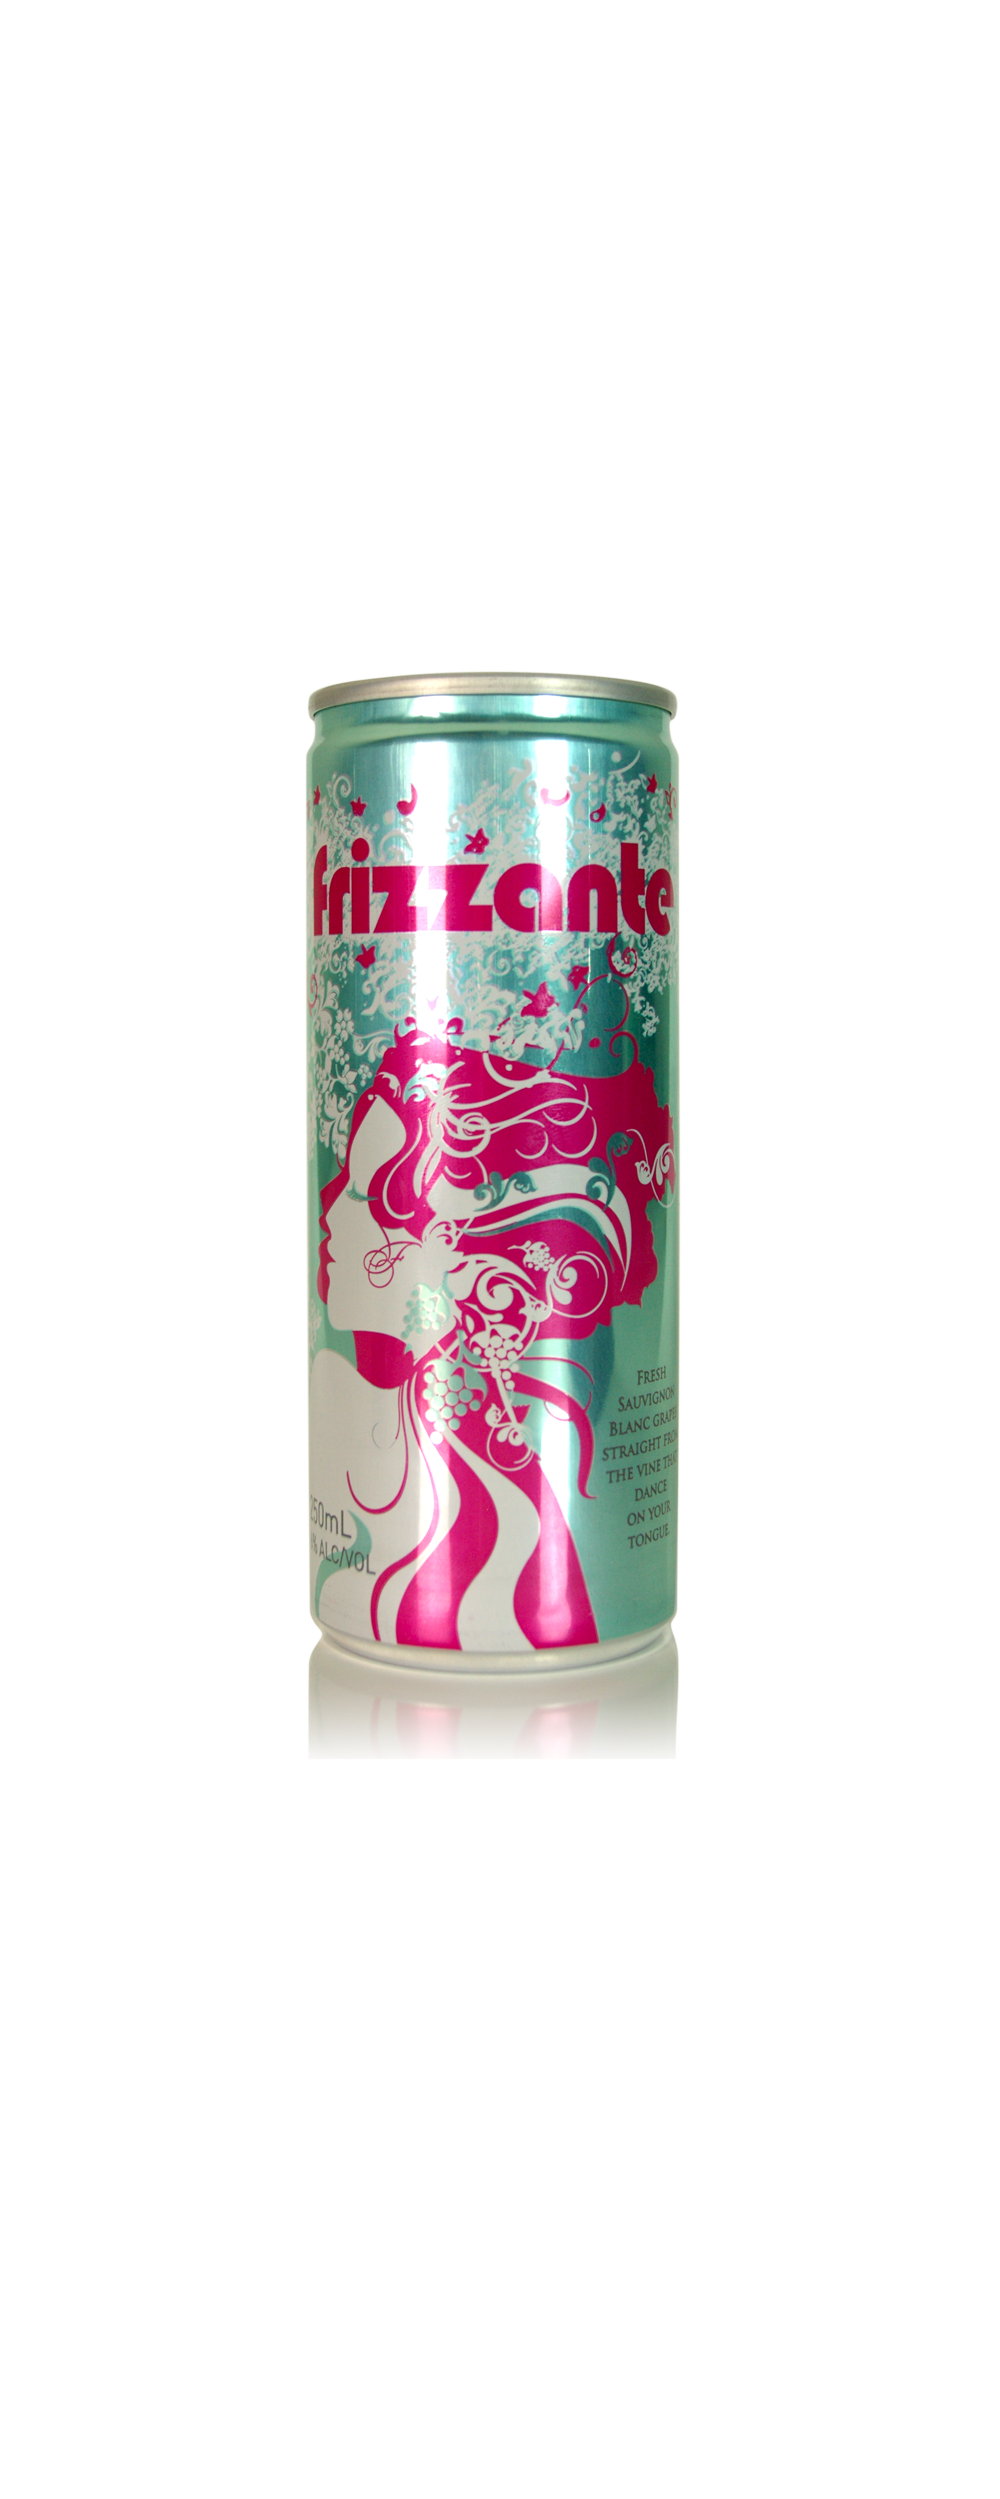 frizzante - can 4-pack